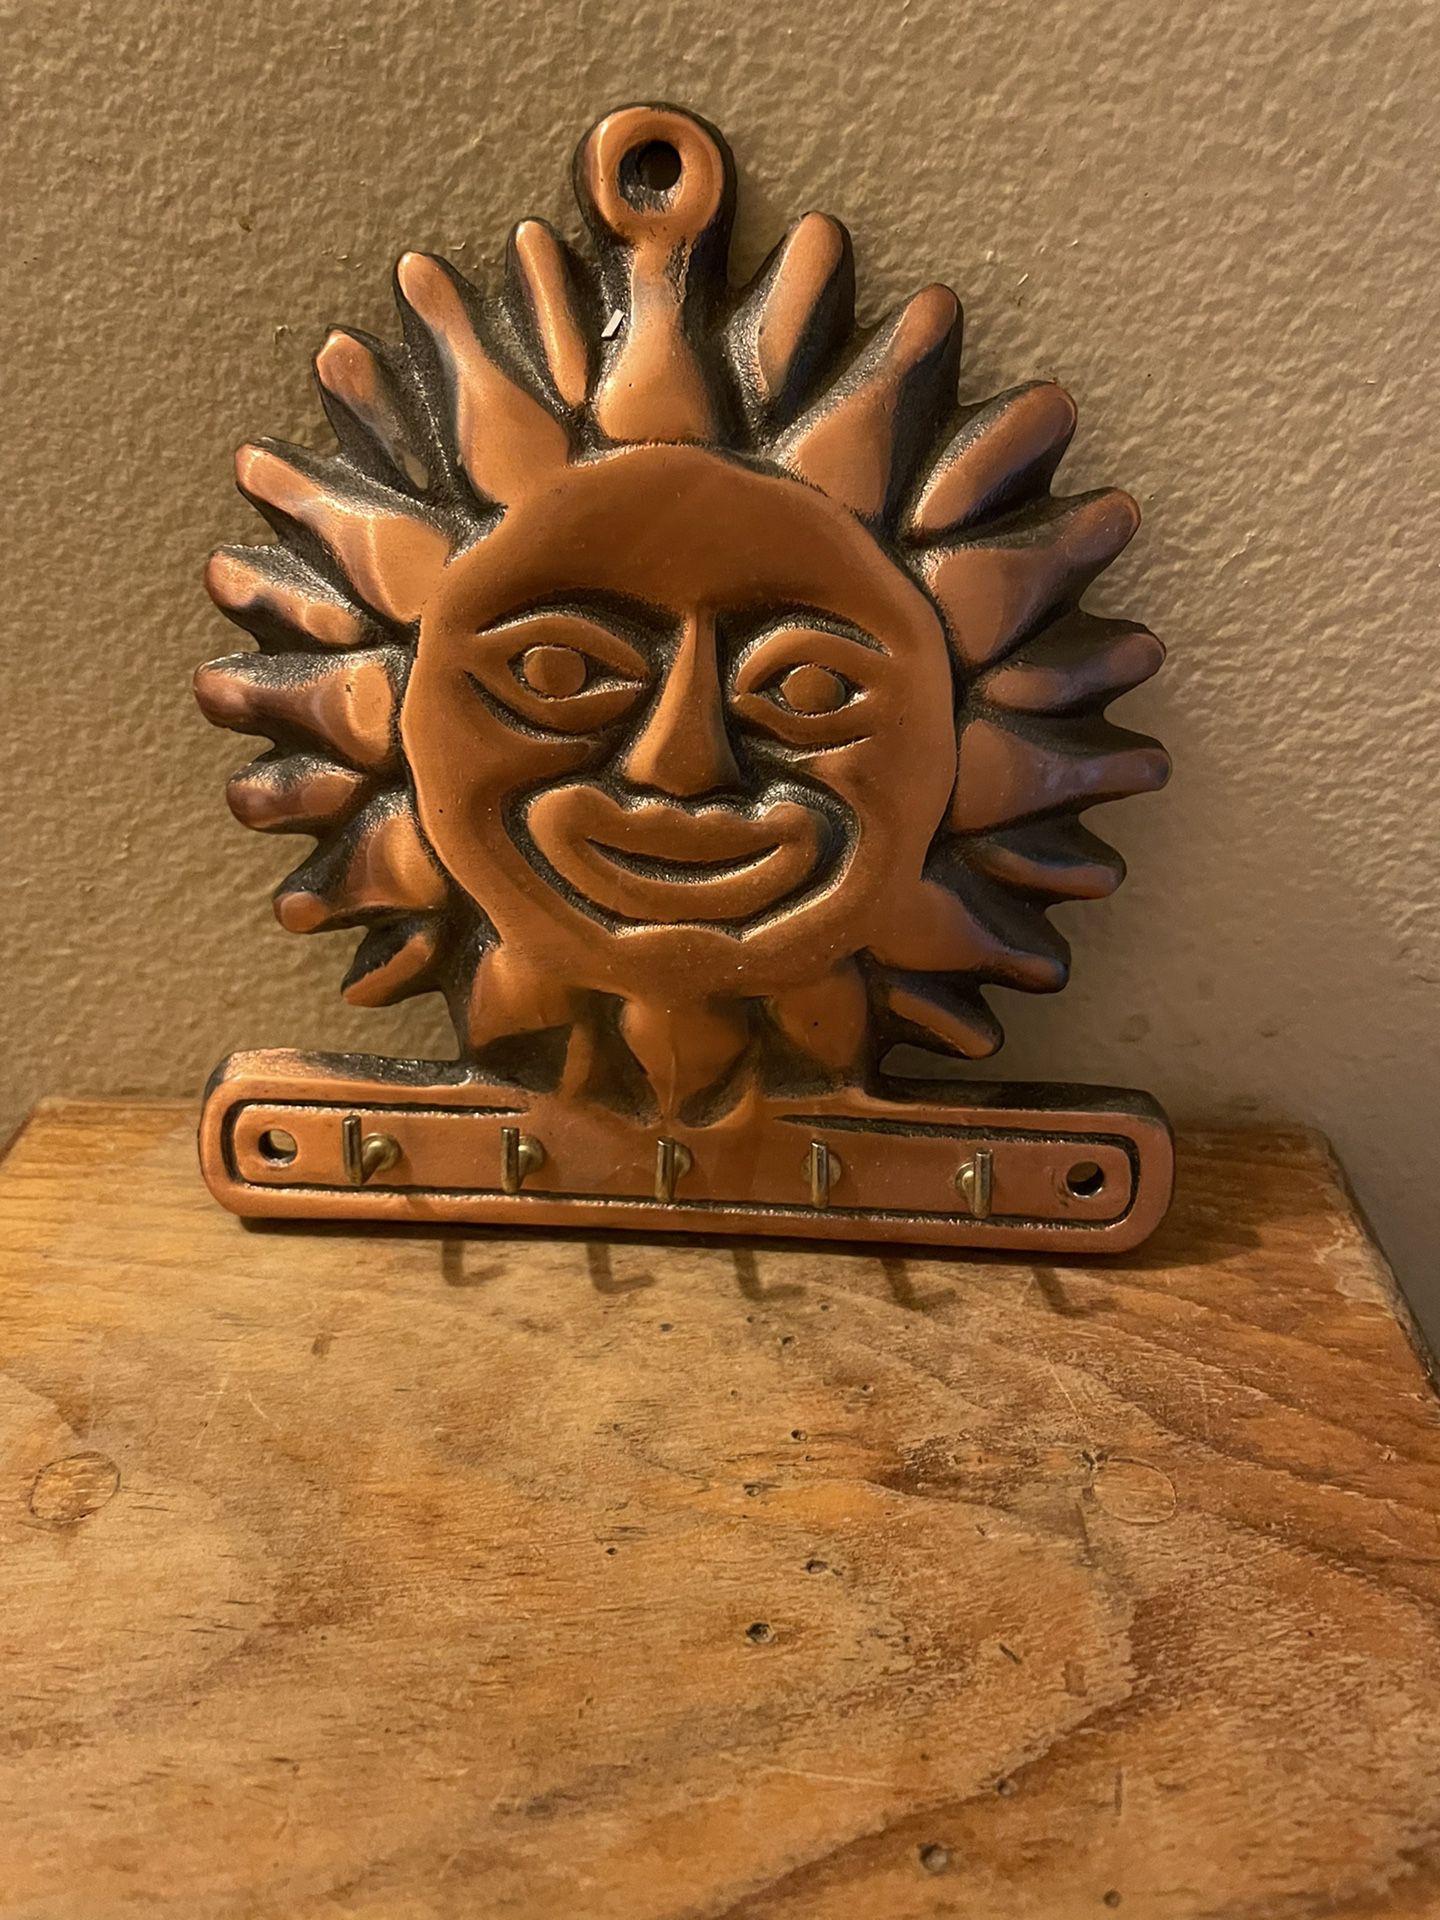 Sun made of metal. New very heavy. Holds keys.